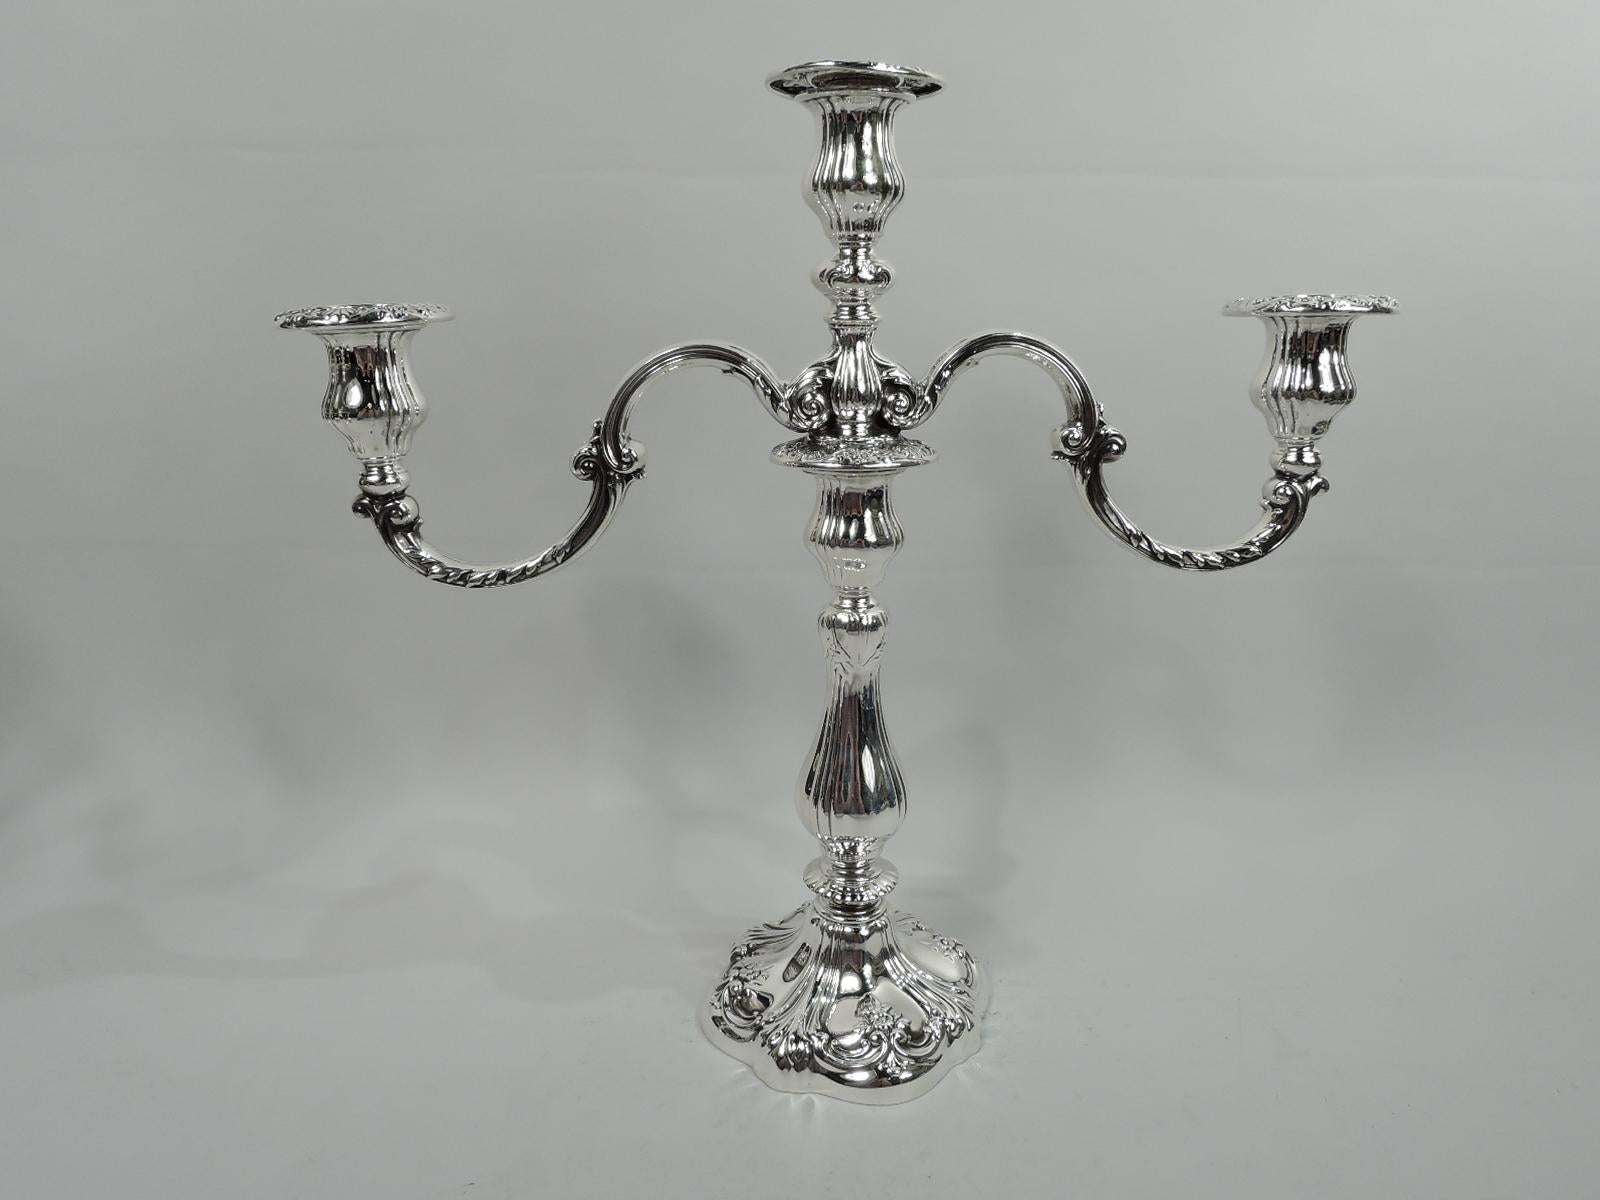 Pair of Edwardian Art Nouveau sterling silver 3-light candelabra. Made by Gorham in Providence in 1904-5. Each: Knopped baluster shaft on raised shaped foot. Central socket between leaf-mounted and -wrapped s-scroll arms, each terminating in single